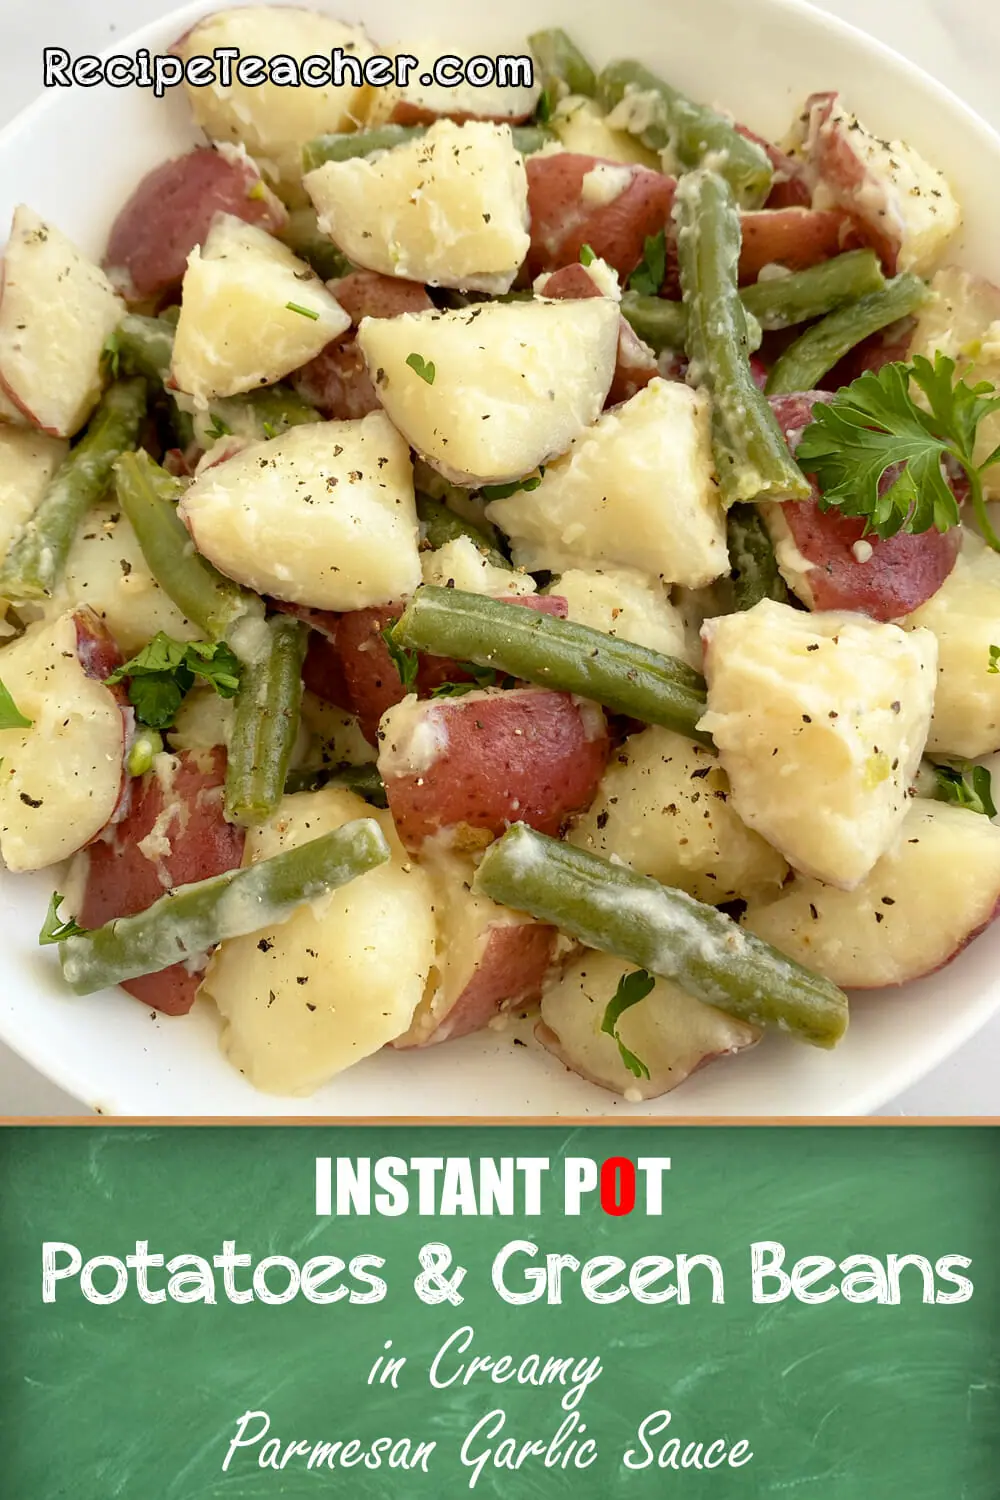 Recipe for Instant Pot Parmesan Garlic potatoes and green beans